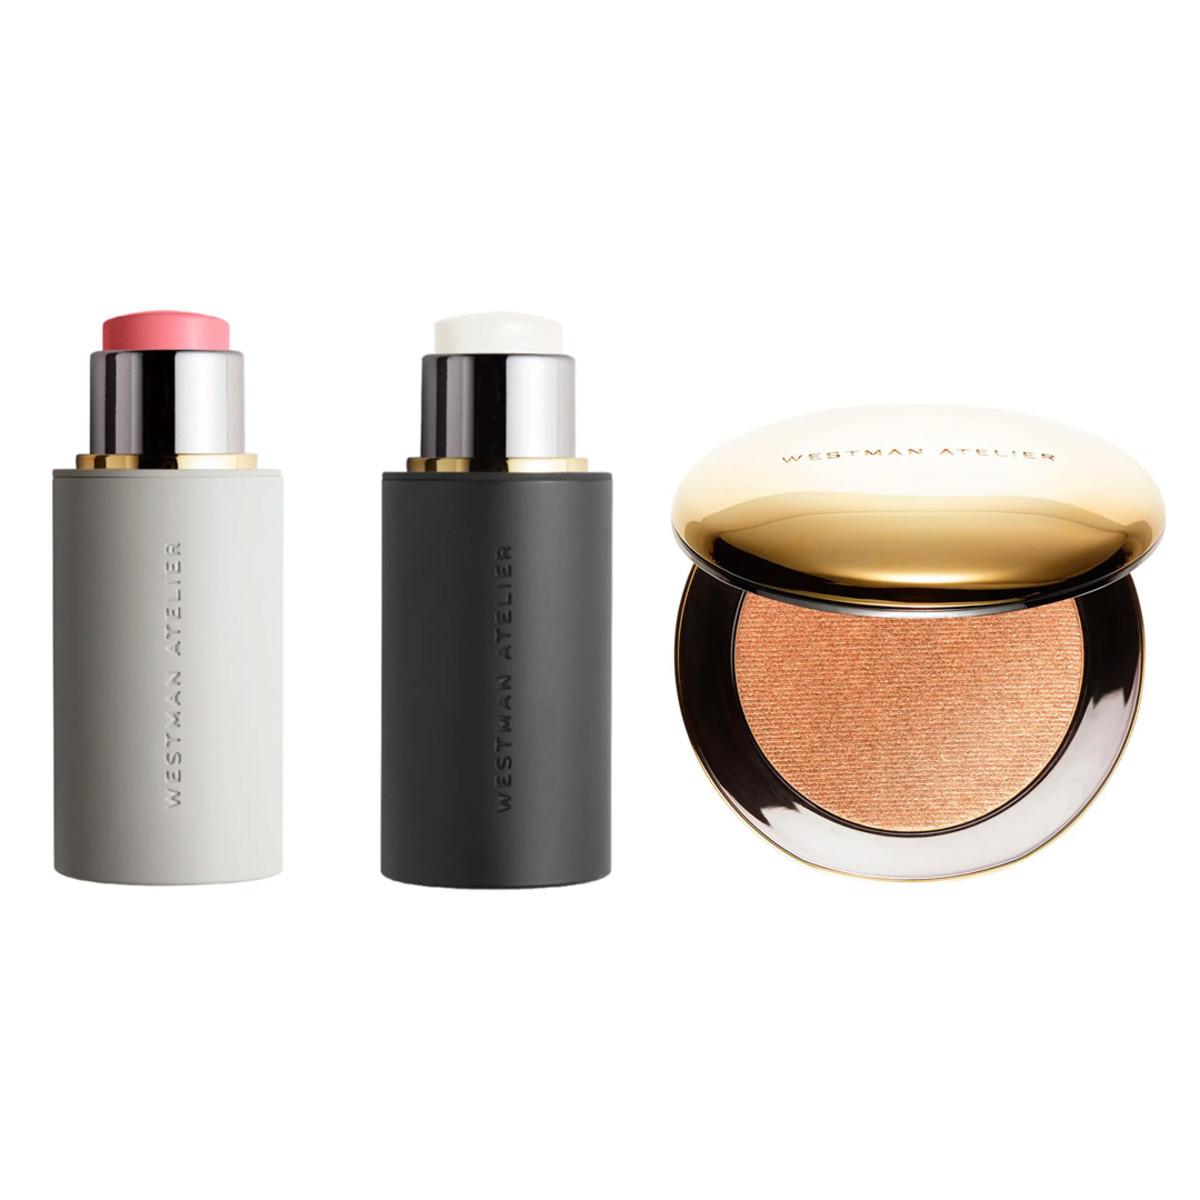 One of the best makeup gift sets for women who love all things beauty, the Westman Atelier The Good Skin Edition Makeup Set available now at Sephora